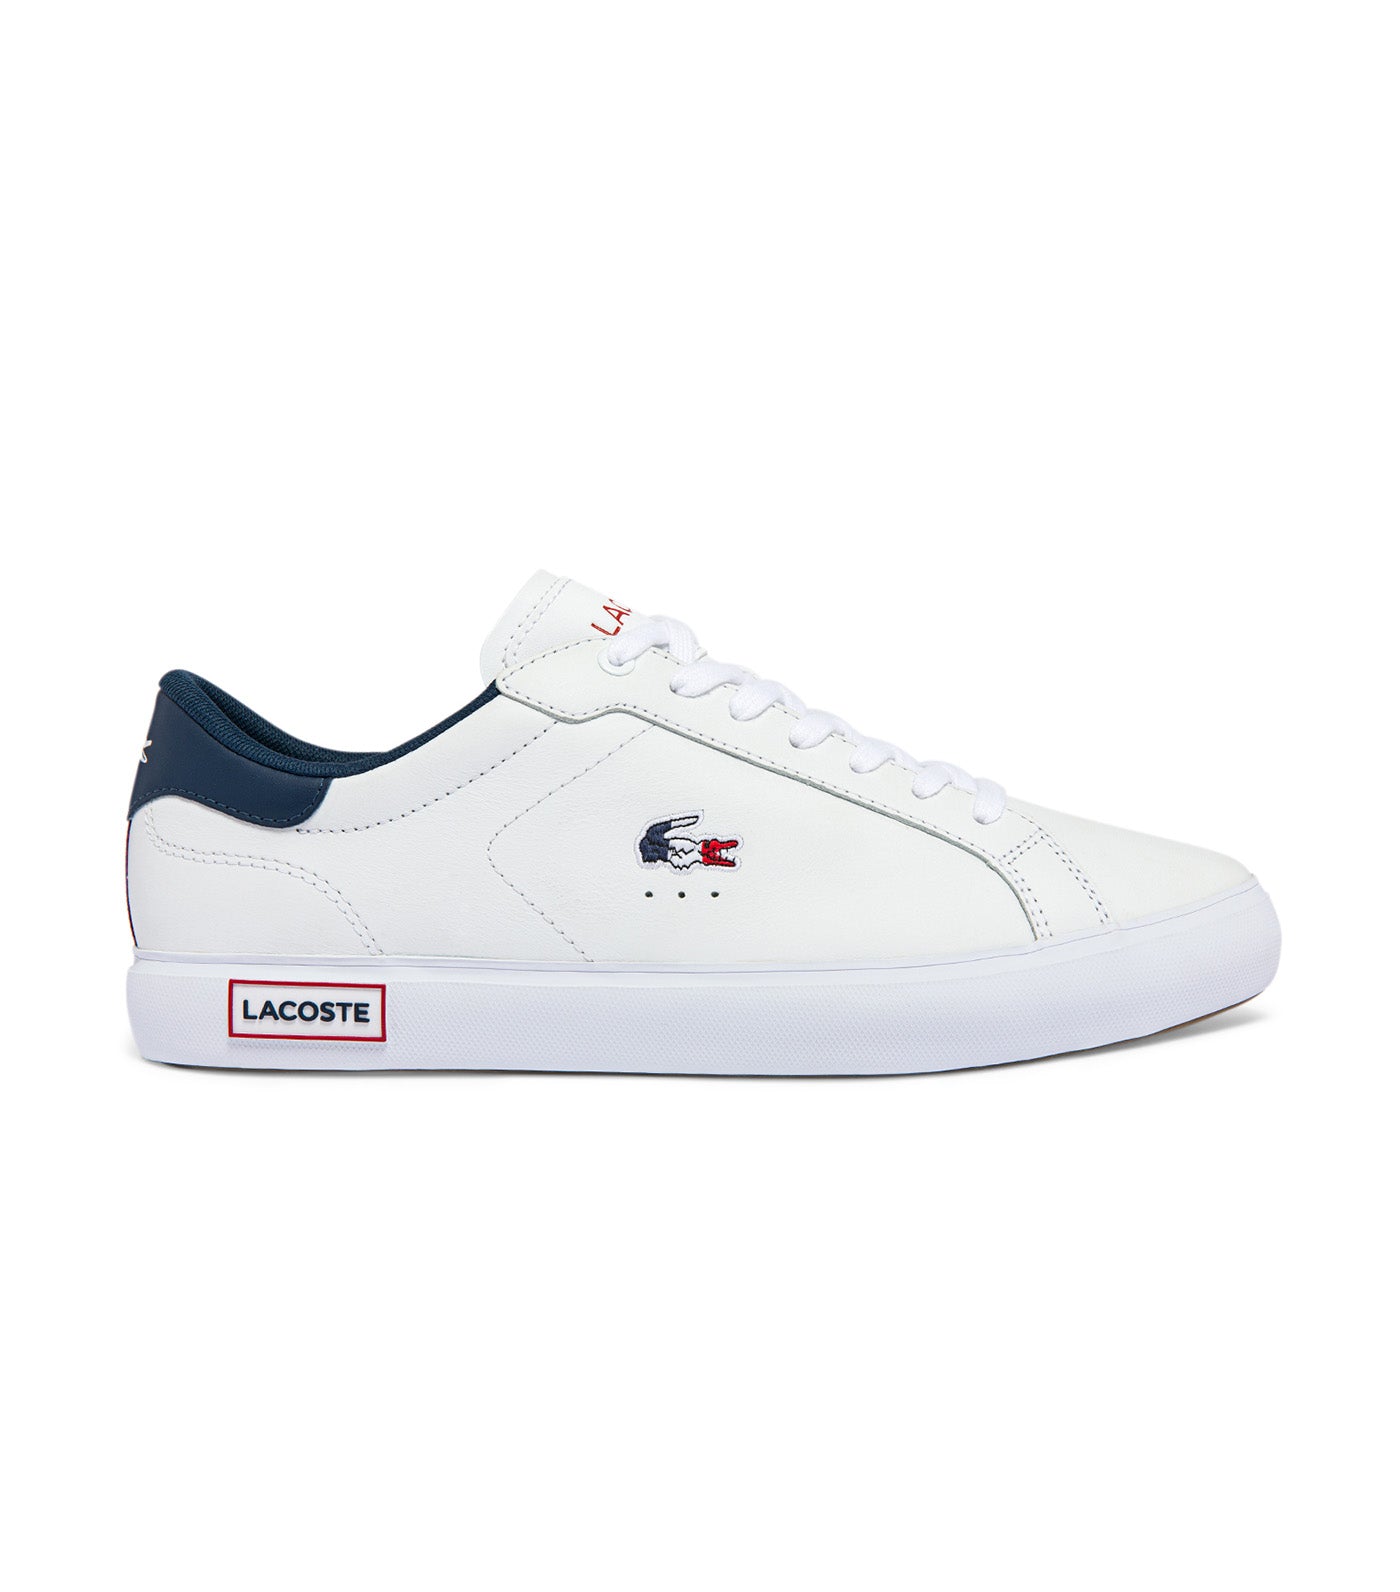 Men's Powercourt Leather Tricolour Trainers White/Navy/Red